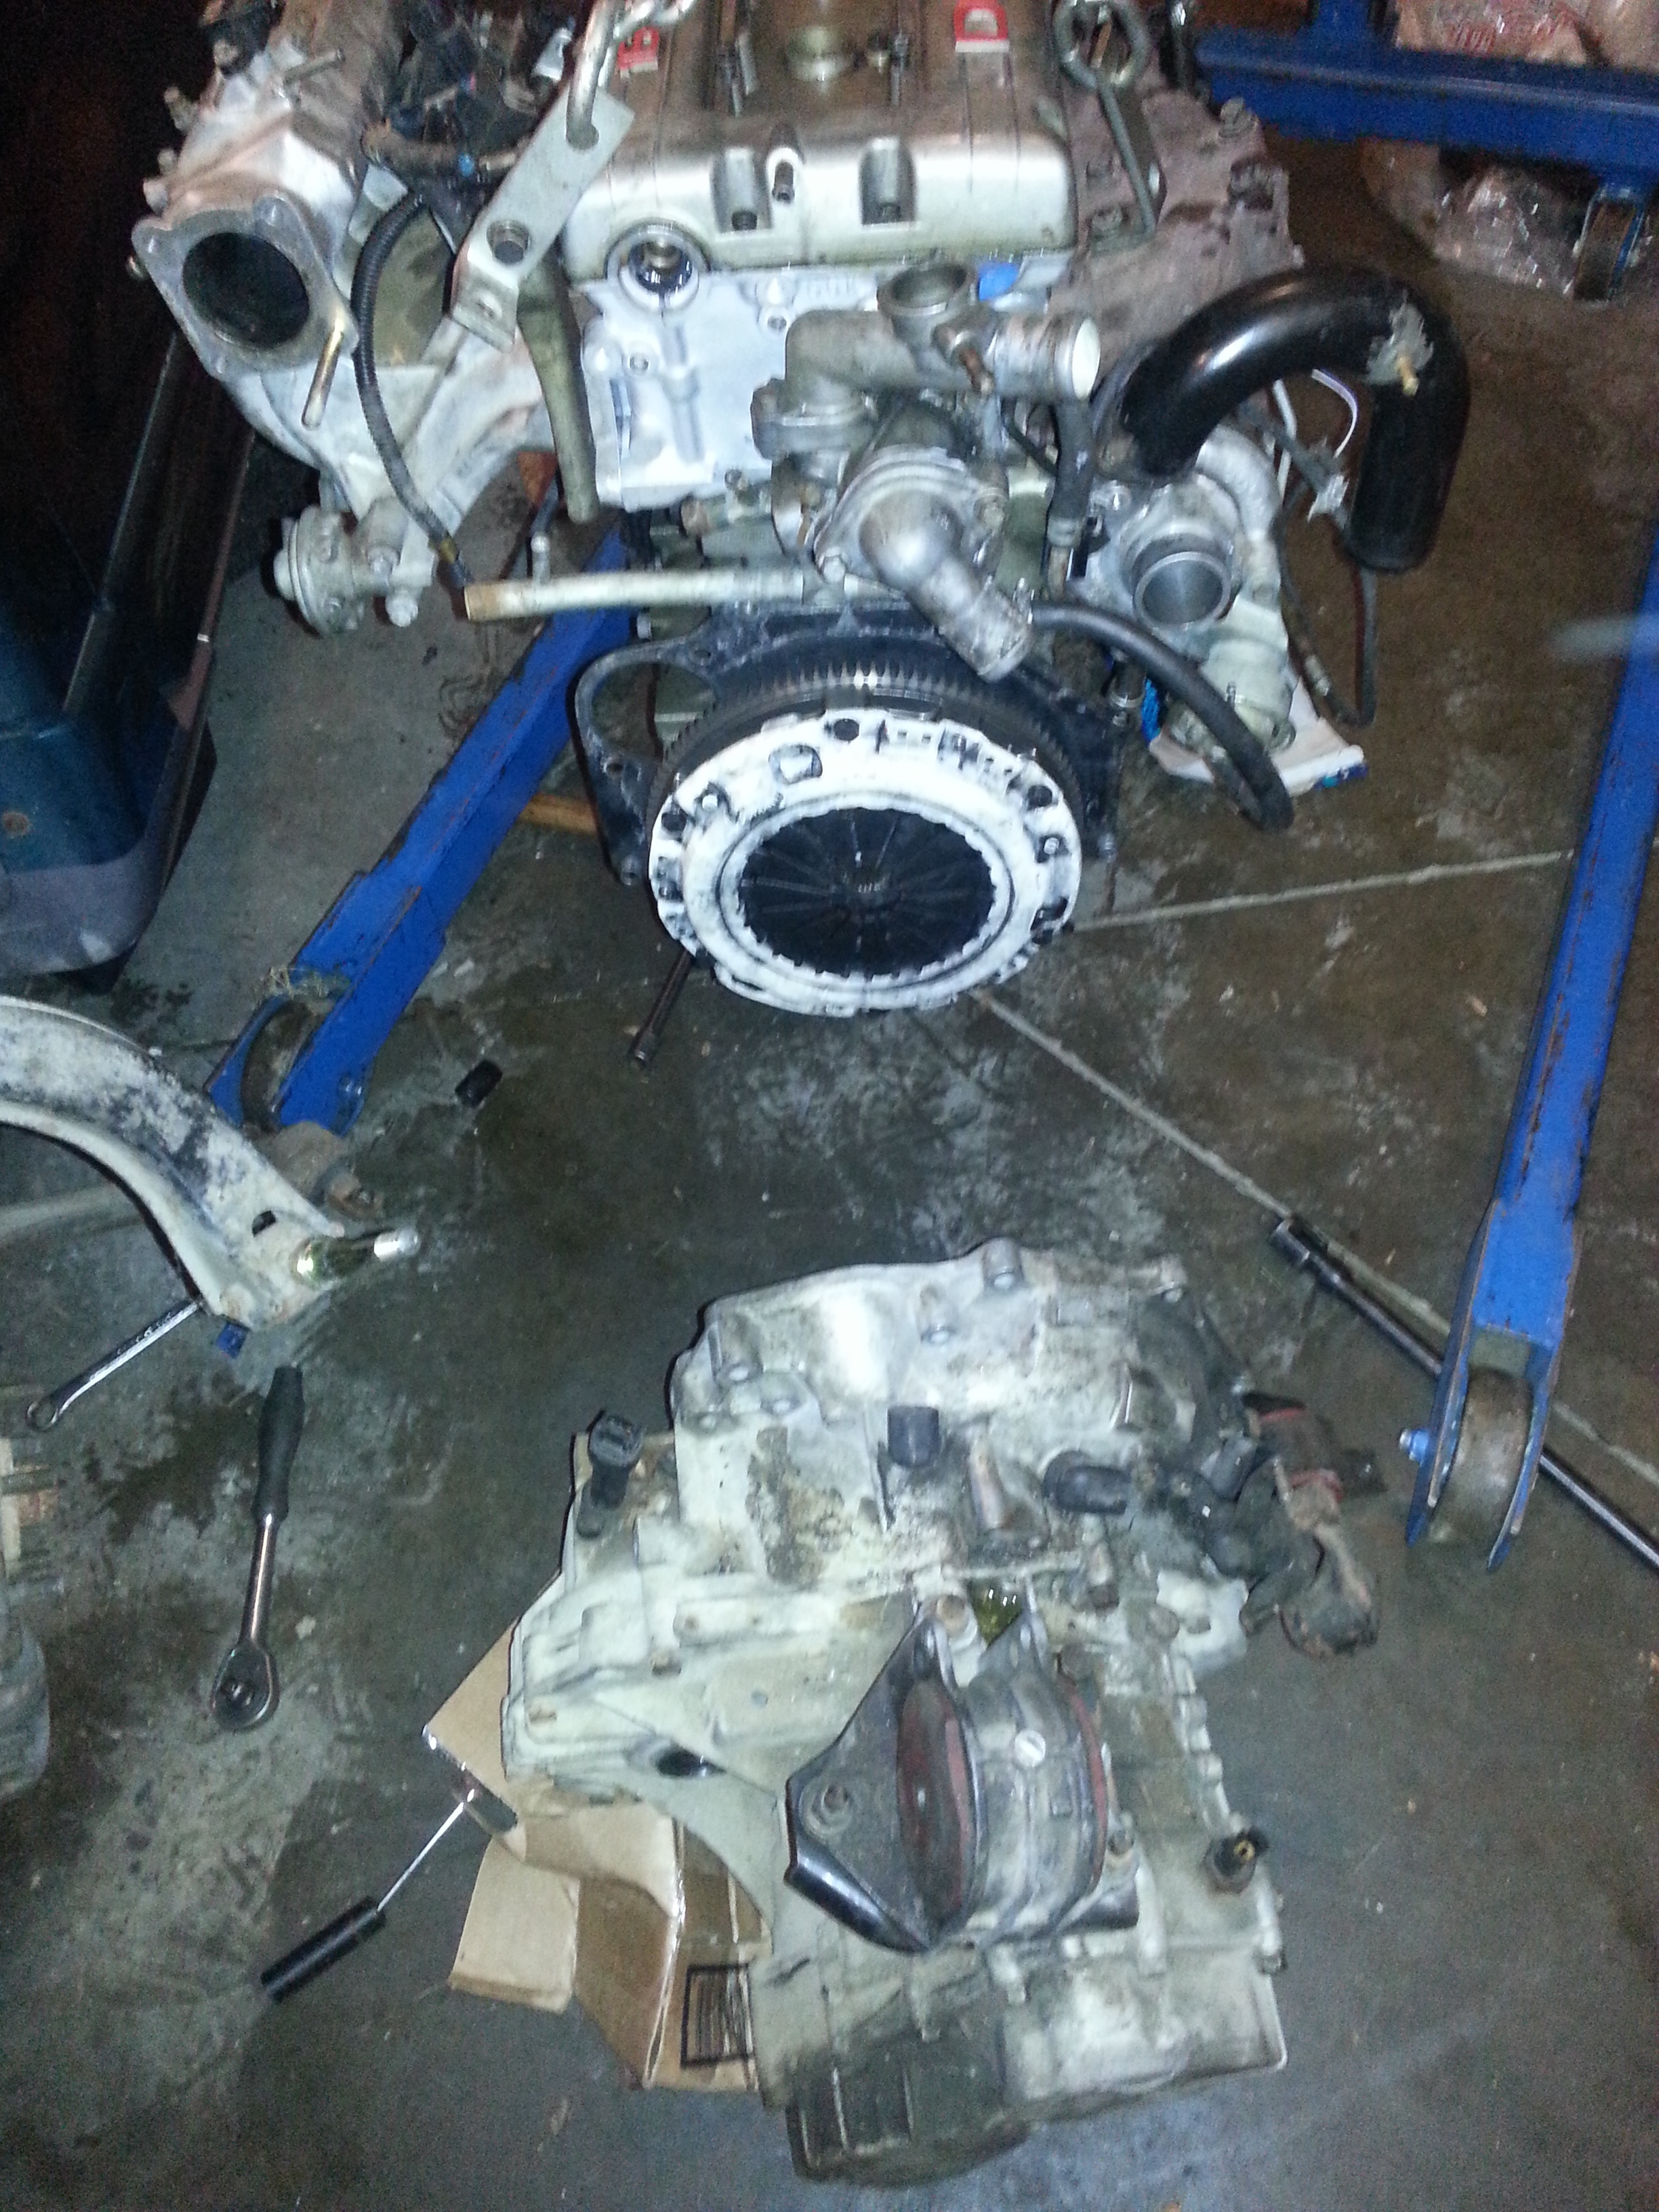 Putting the transmission onto the flywheel/clutch